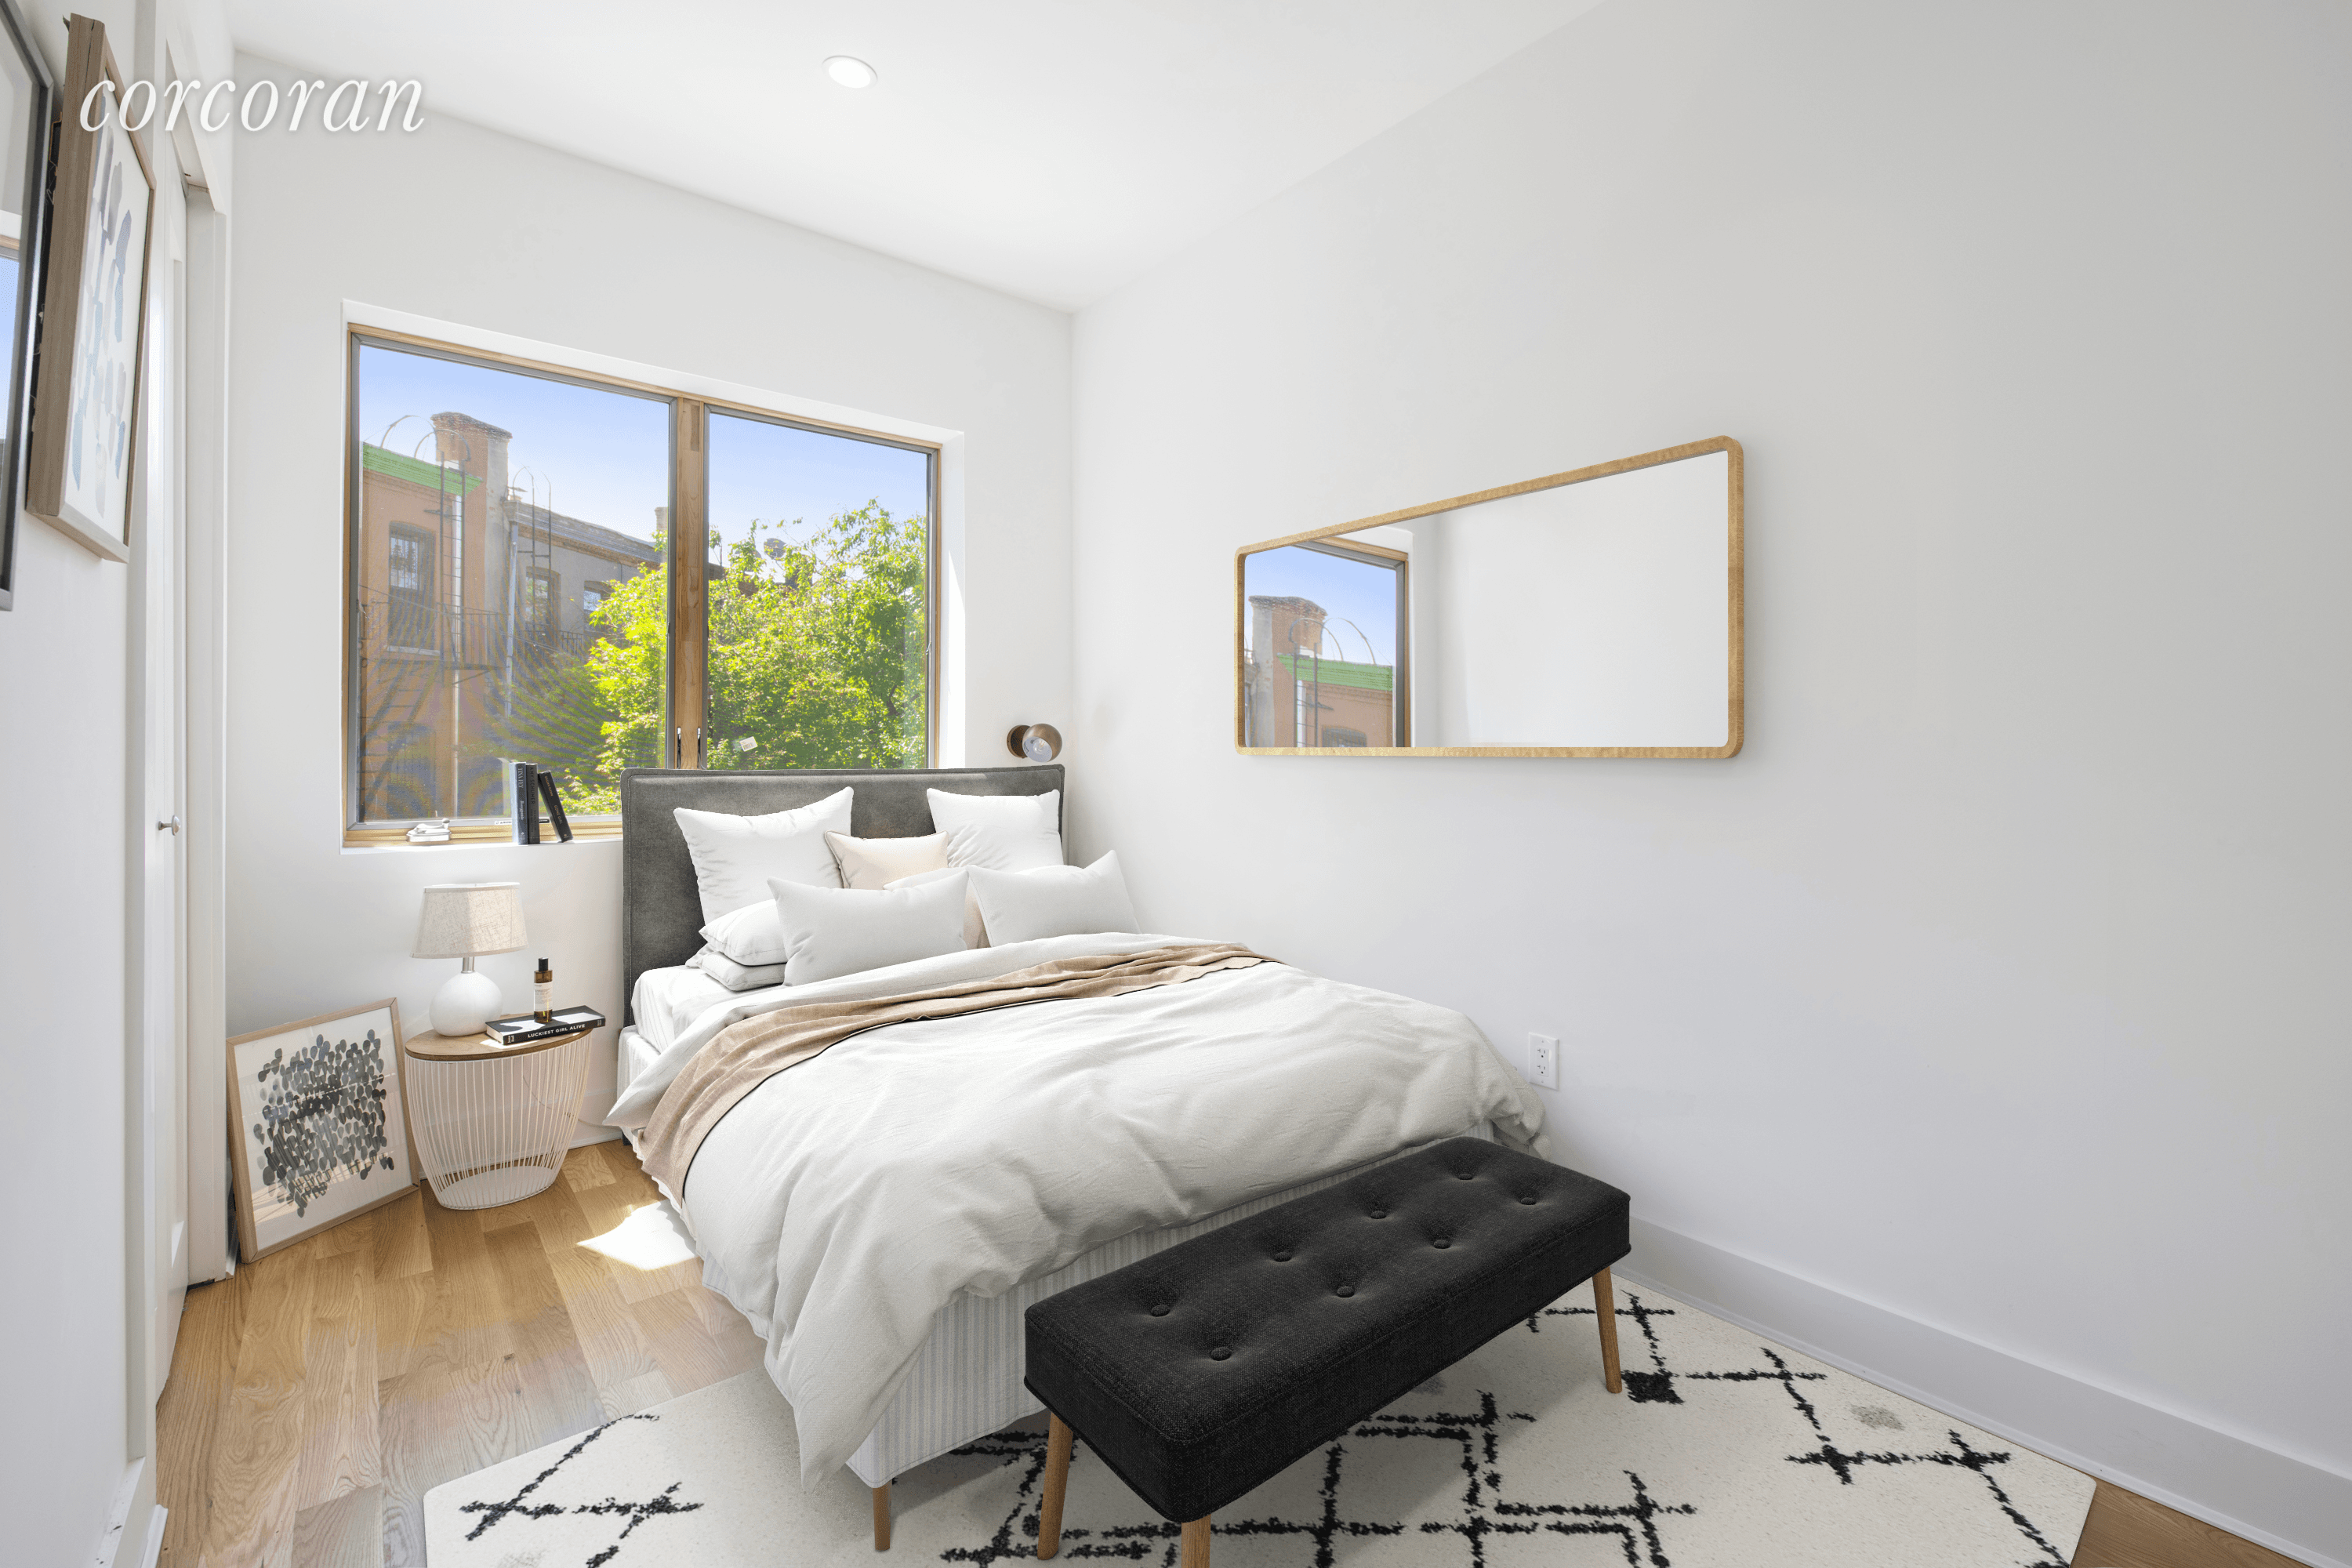 Welcome to The Pearl at 1776 Broadway, a brand new condominium development nestled in the intersection between Ocean Hill, Bed Stuy, and Bushwick.